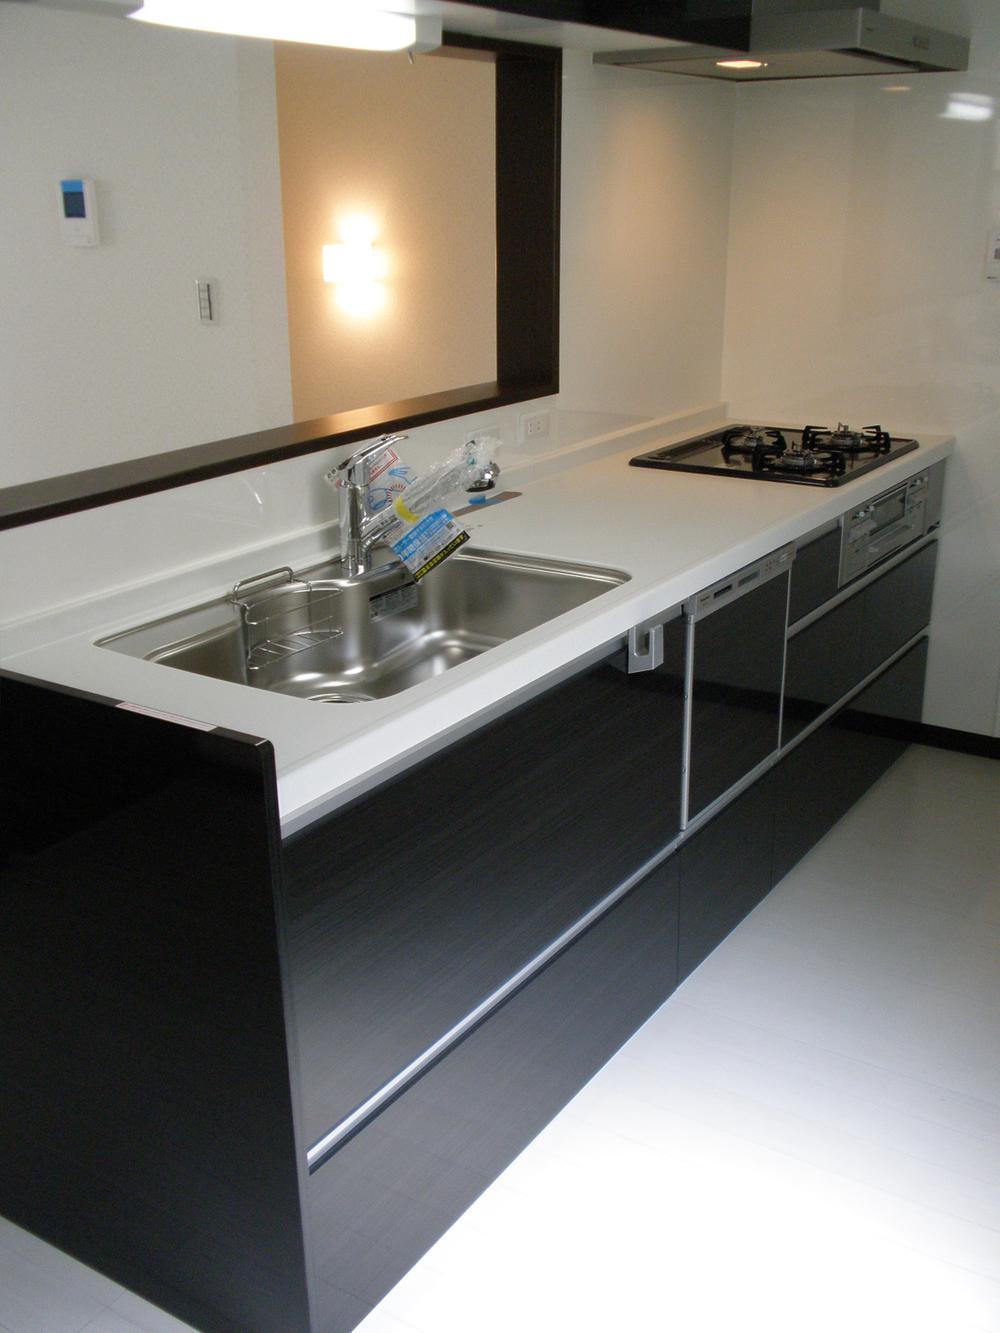 Same specifications photo (kitchen). This is a system kitchen of the same specification.